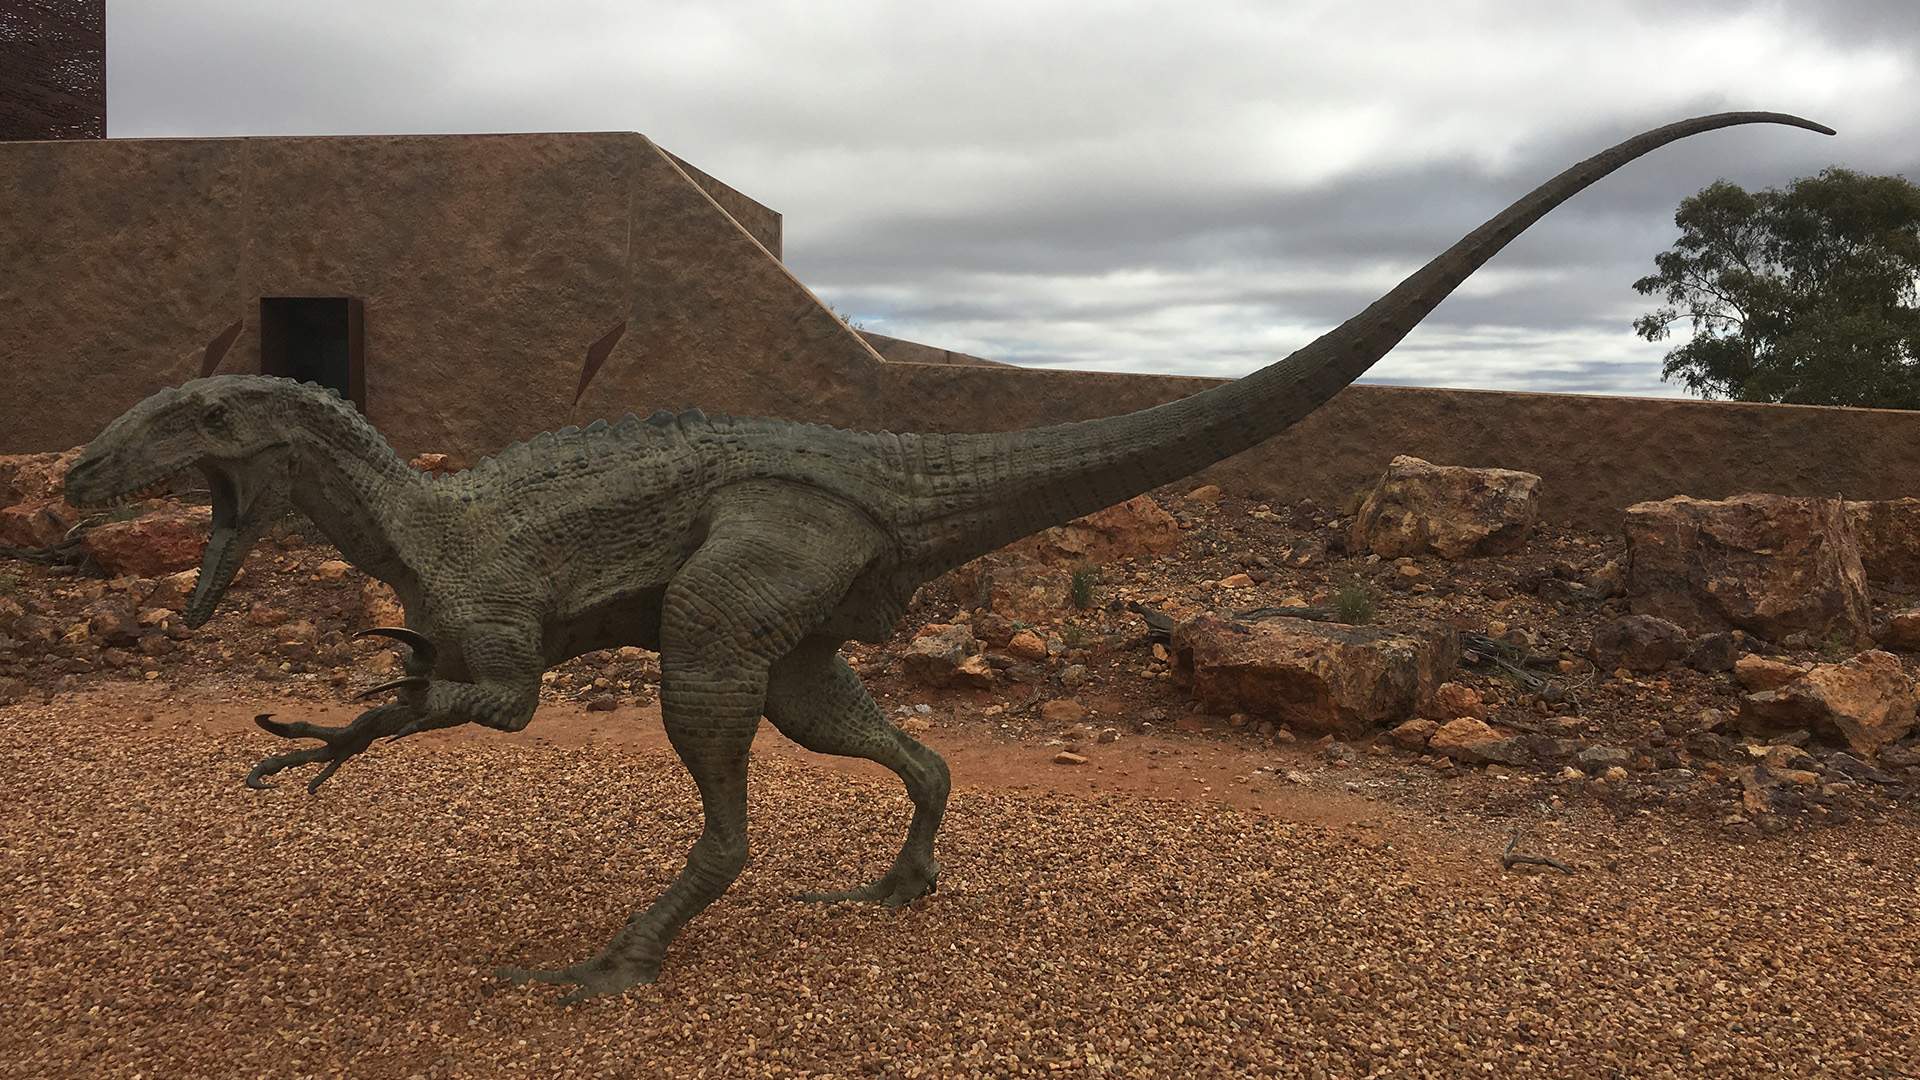 Follow in Giant Footsteps at Australia's Own Open-Air Dinosaur Exhibition